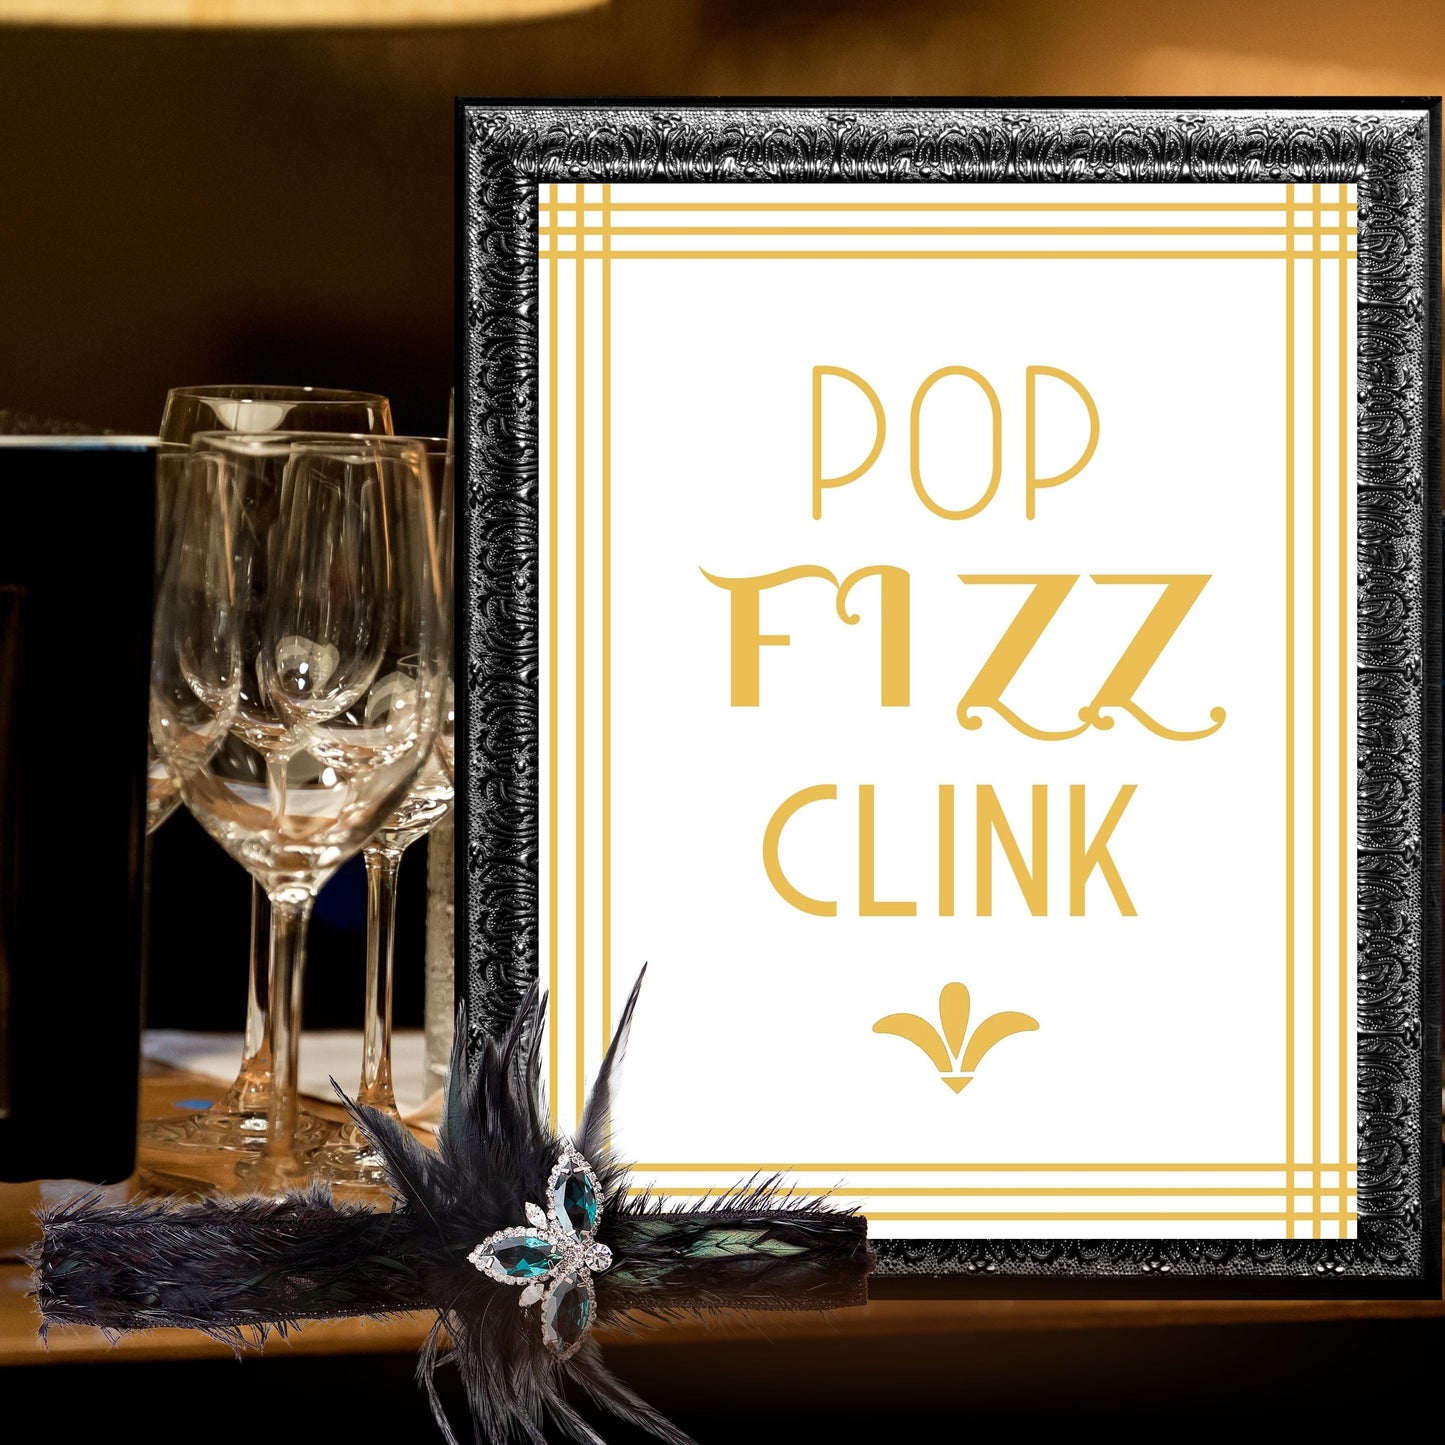 "Pop Fizz Clink" Printable Party Sign For Great Gatsby or Roaring 20's Party Or Wedding,  White & Gold, Printable Party Decor